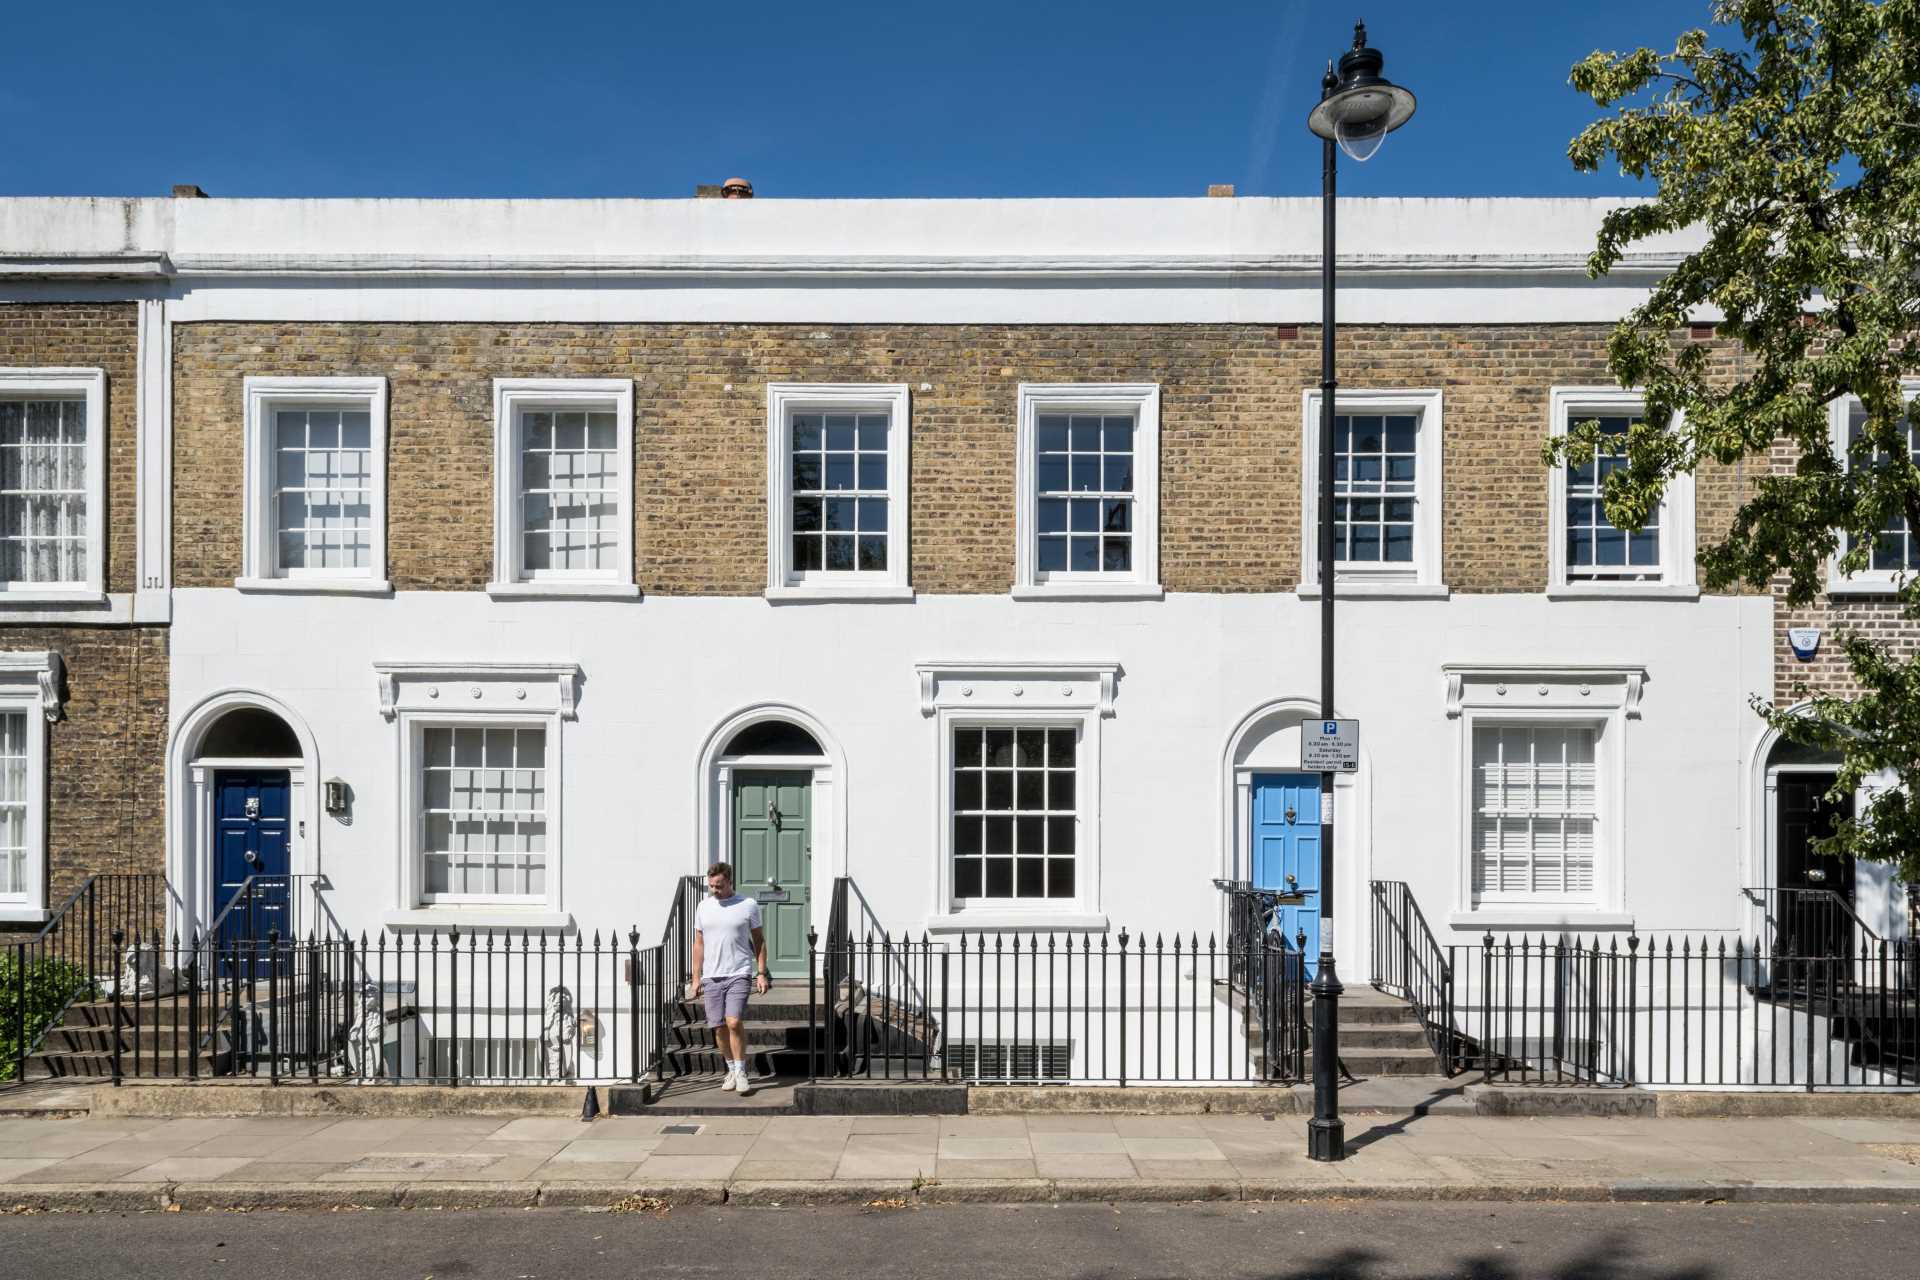 Bradley Van Der Straeten Architects has designed the contemporary renovation and addition of a Grade II listed terrace home in Islington, England.